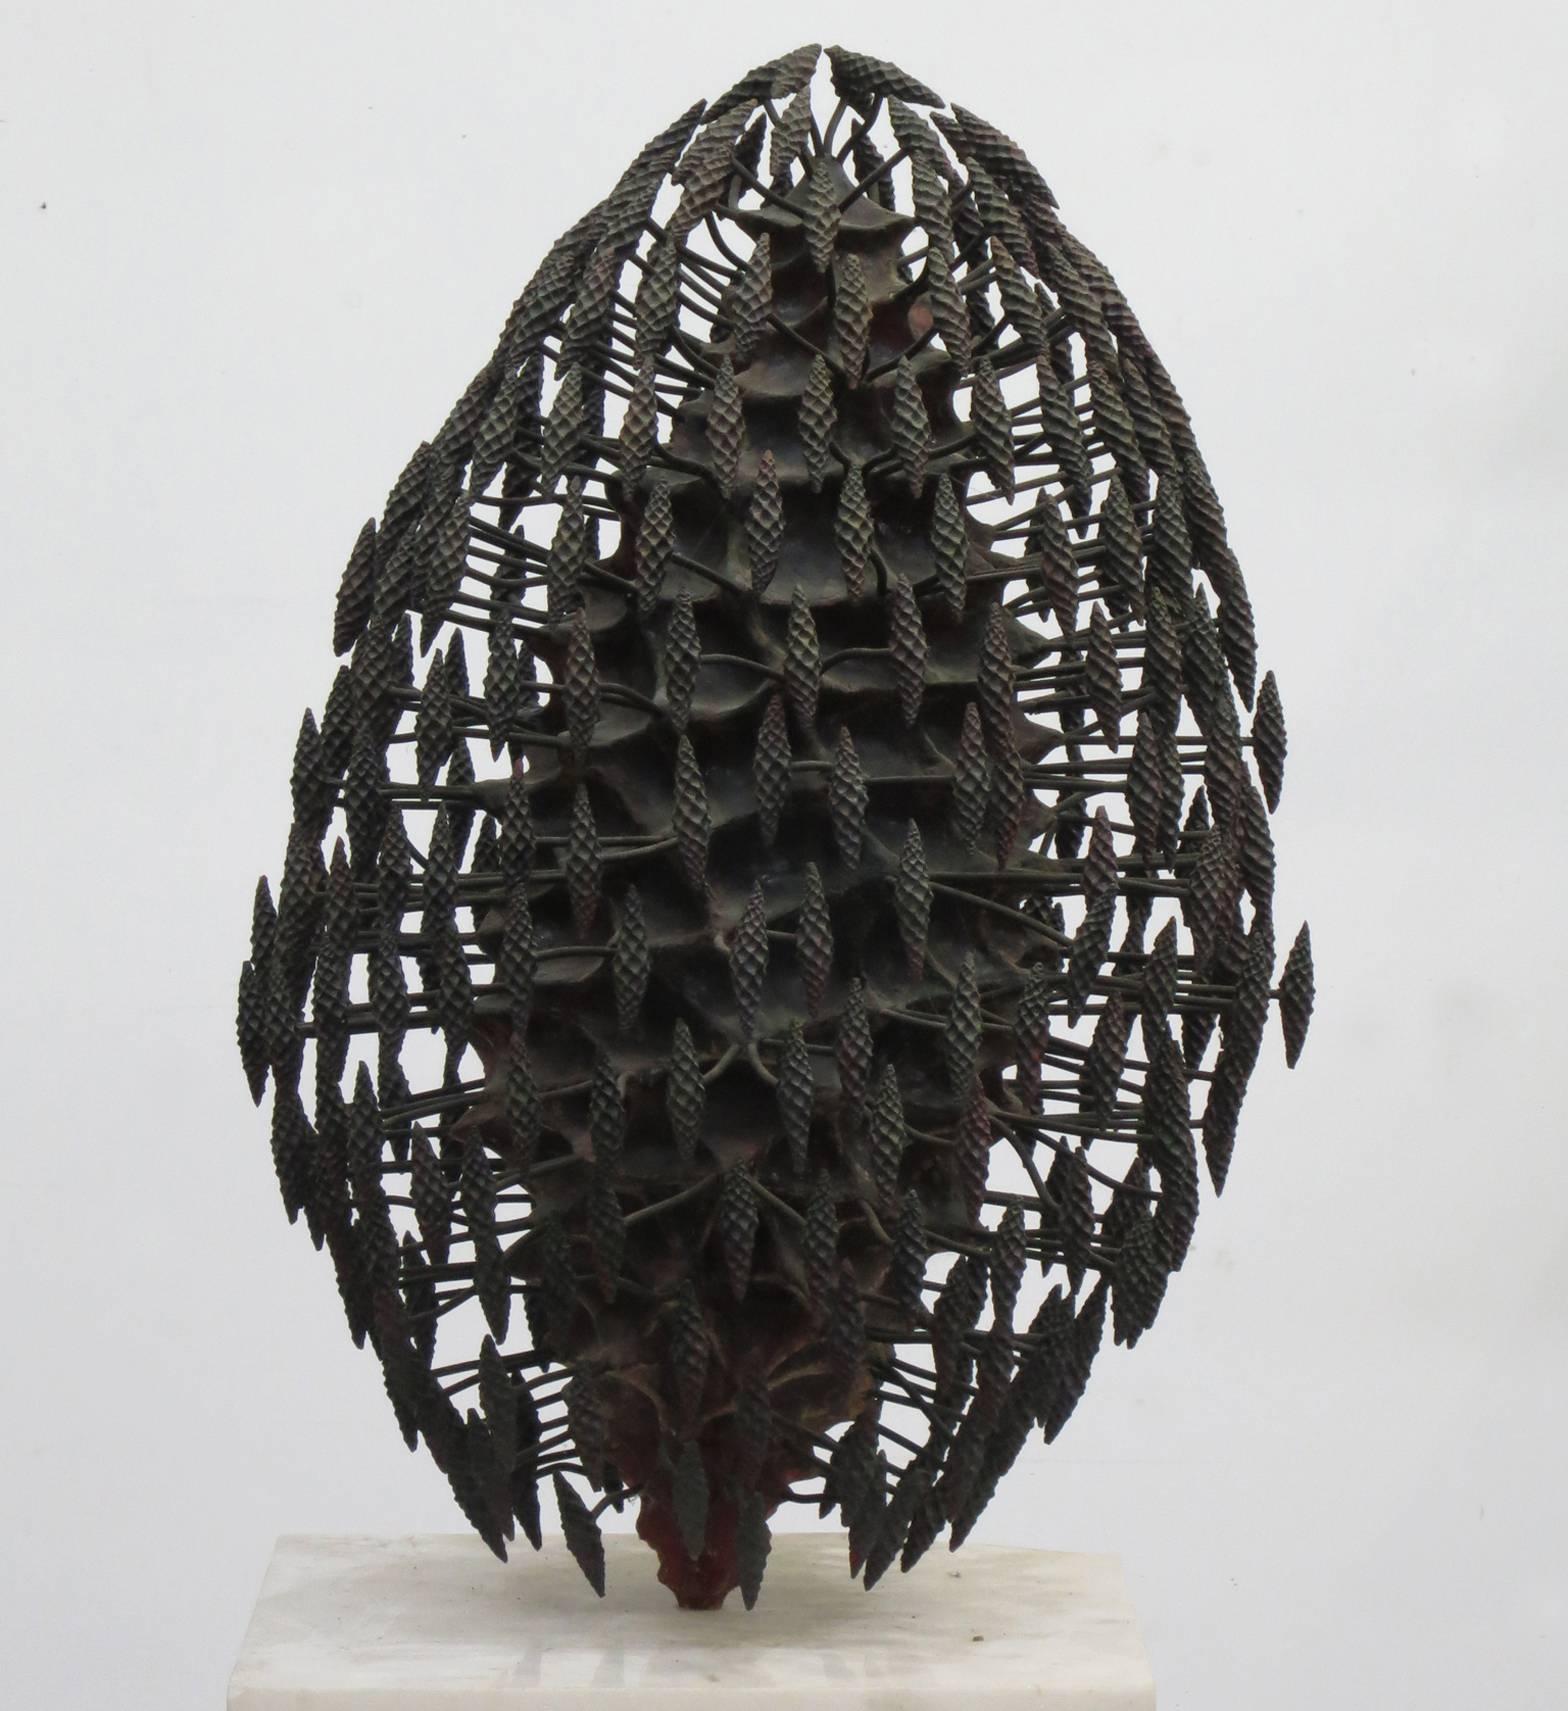  "Generation" its core surrounded by multitudes of tiny offspring in deep bronze - Sculpture by Howard Kalish